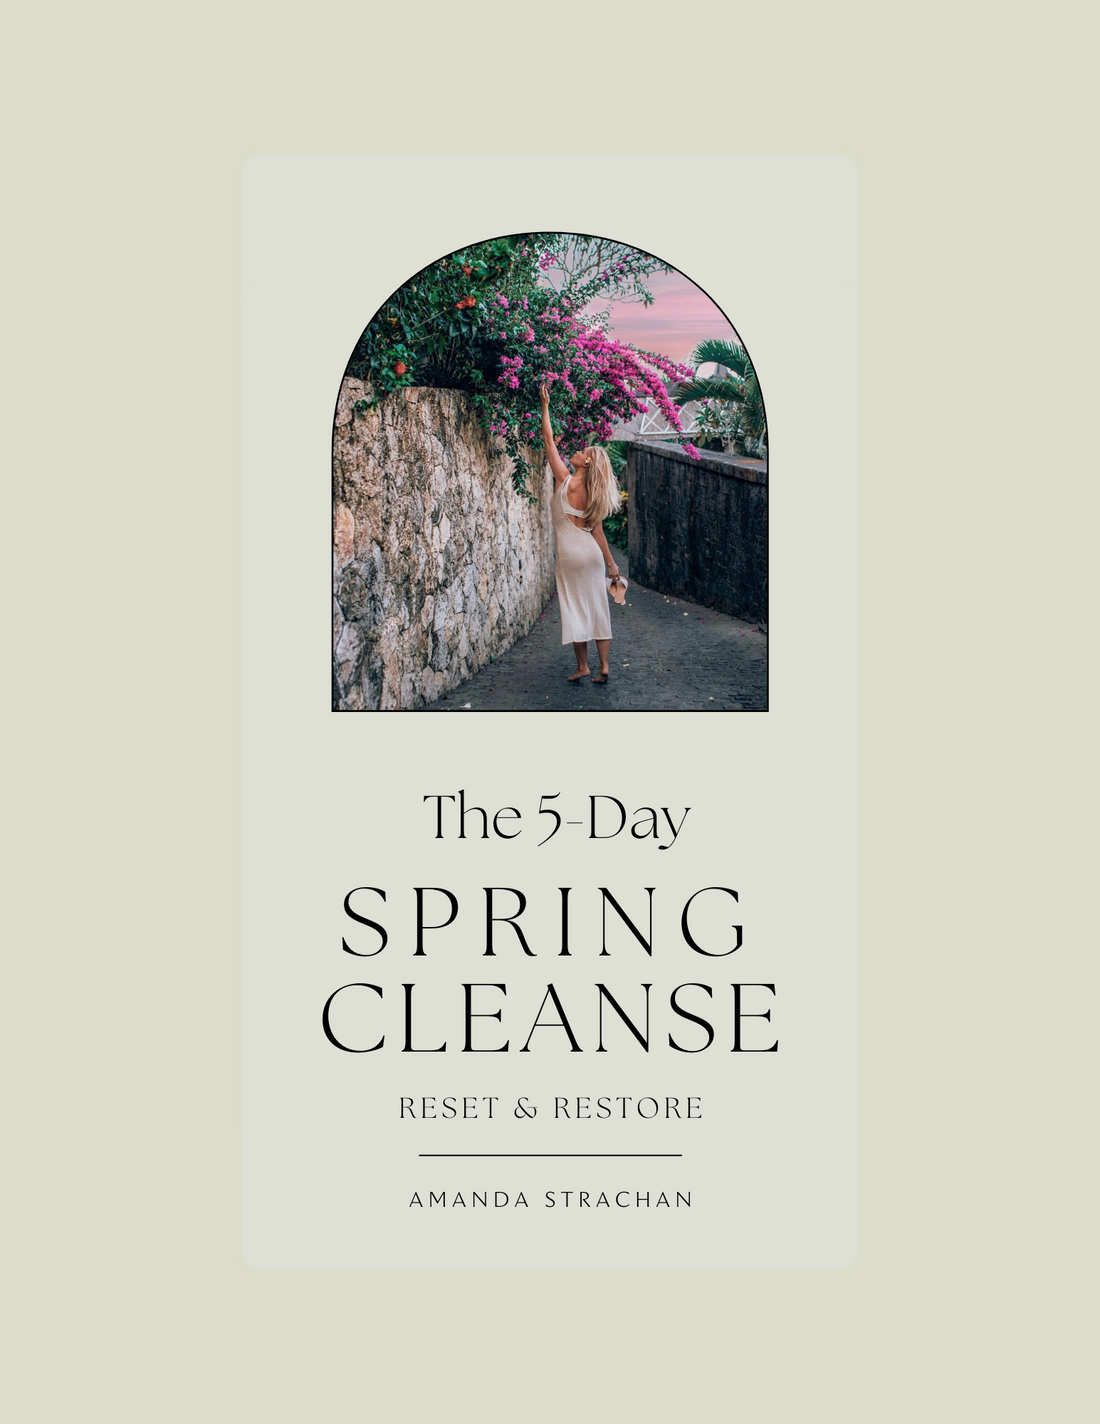 The 5-Day Spring Cleanse